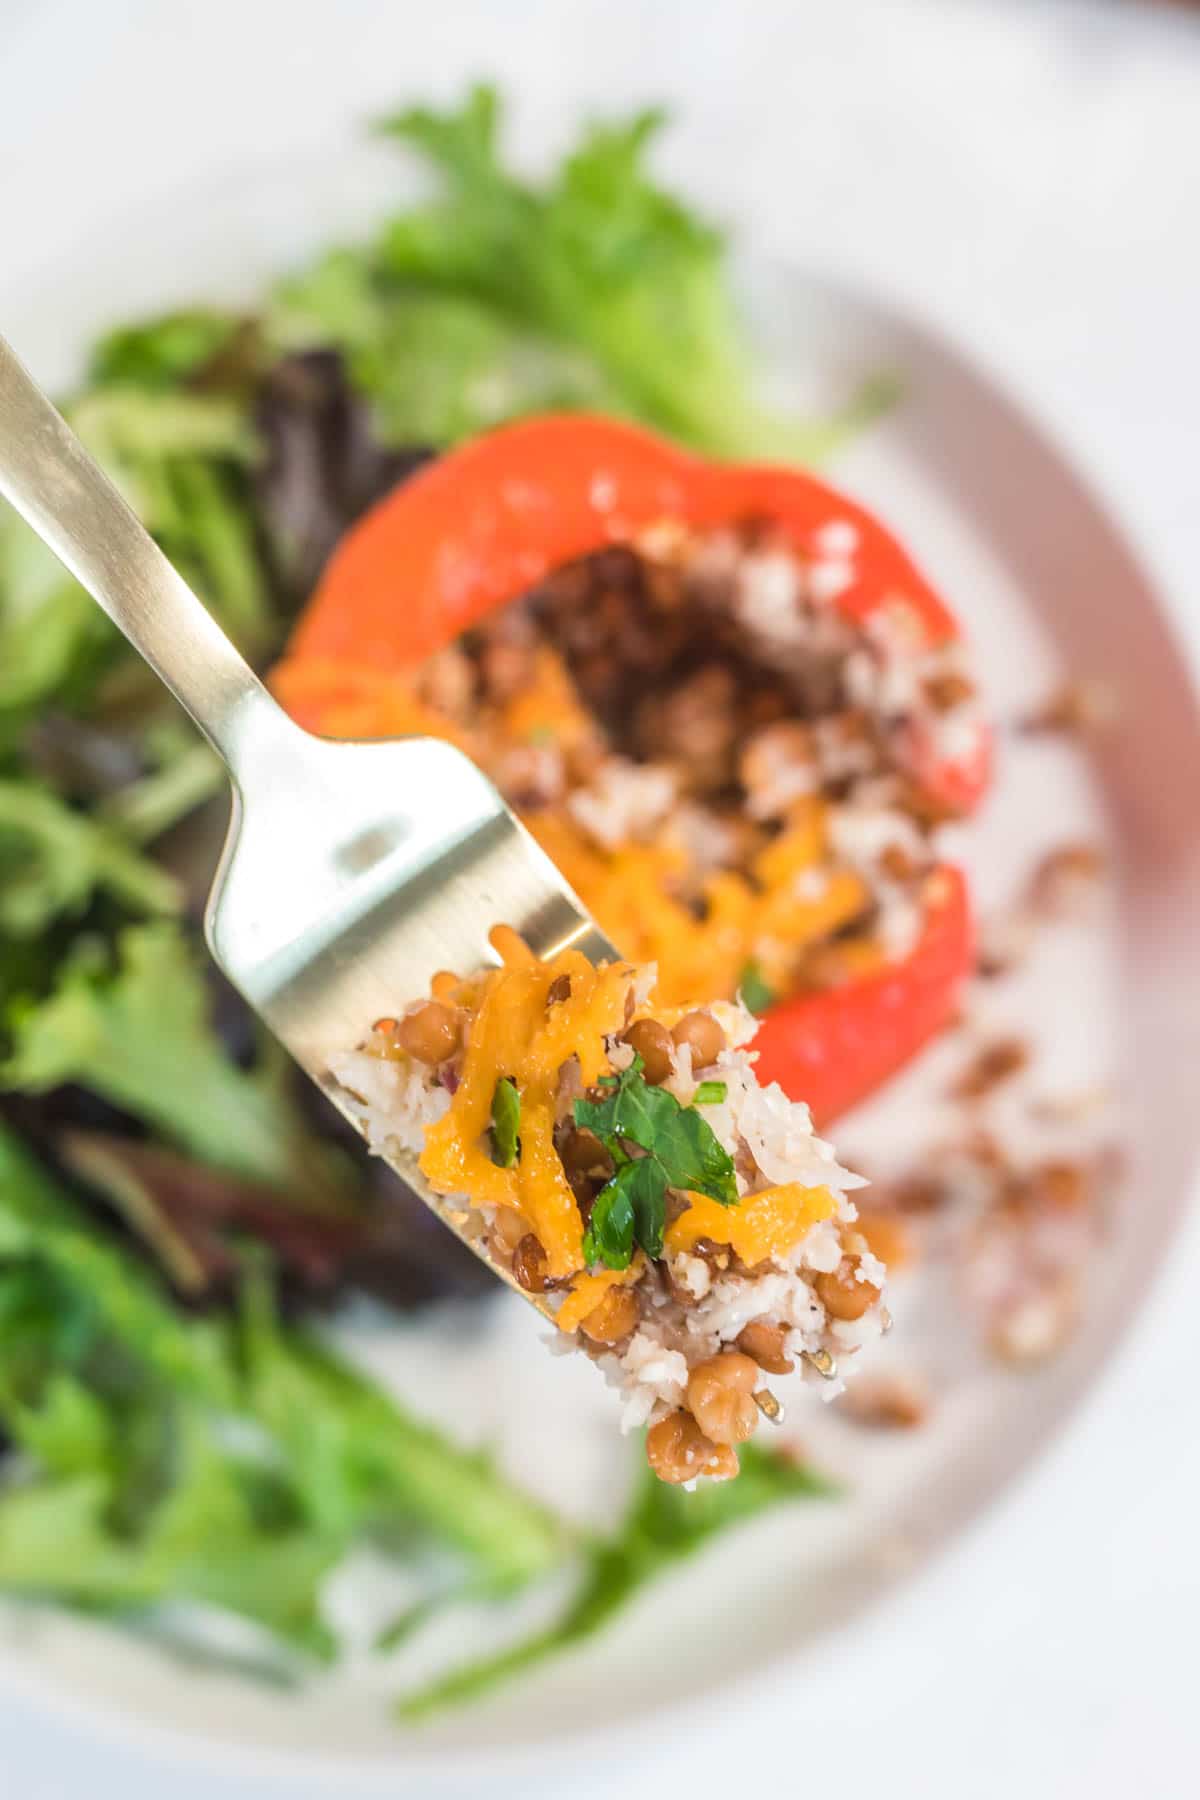 Up close shot of a fork containing a cauliflower rice and cheese mixture from a red bell pepper